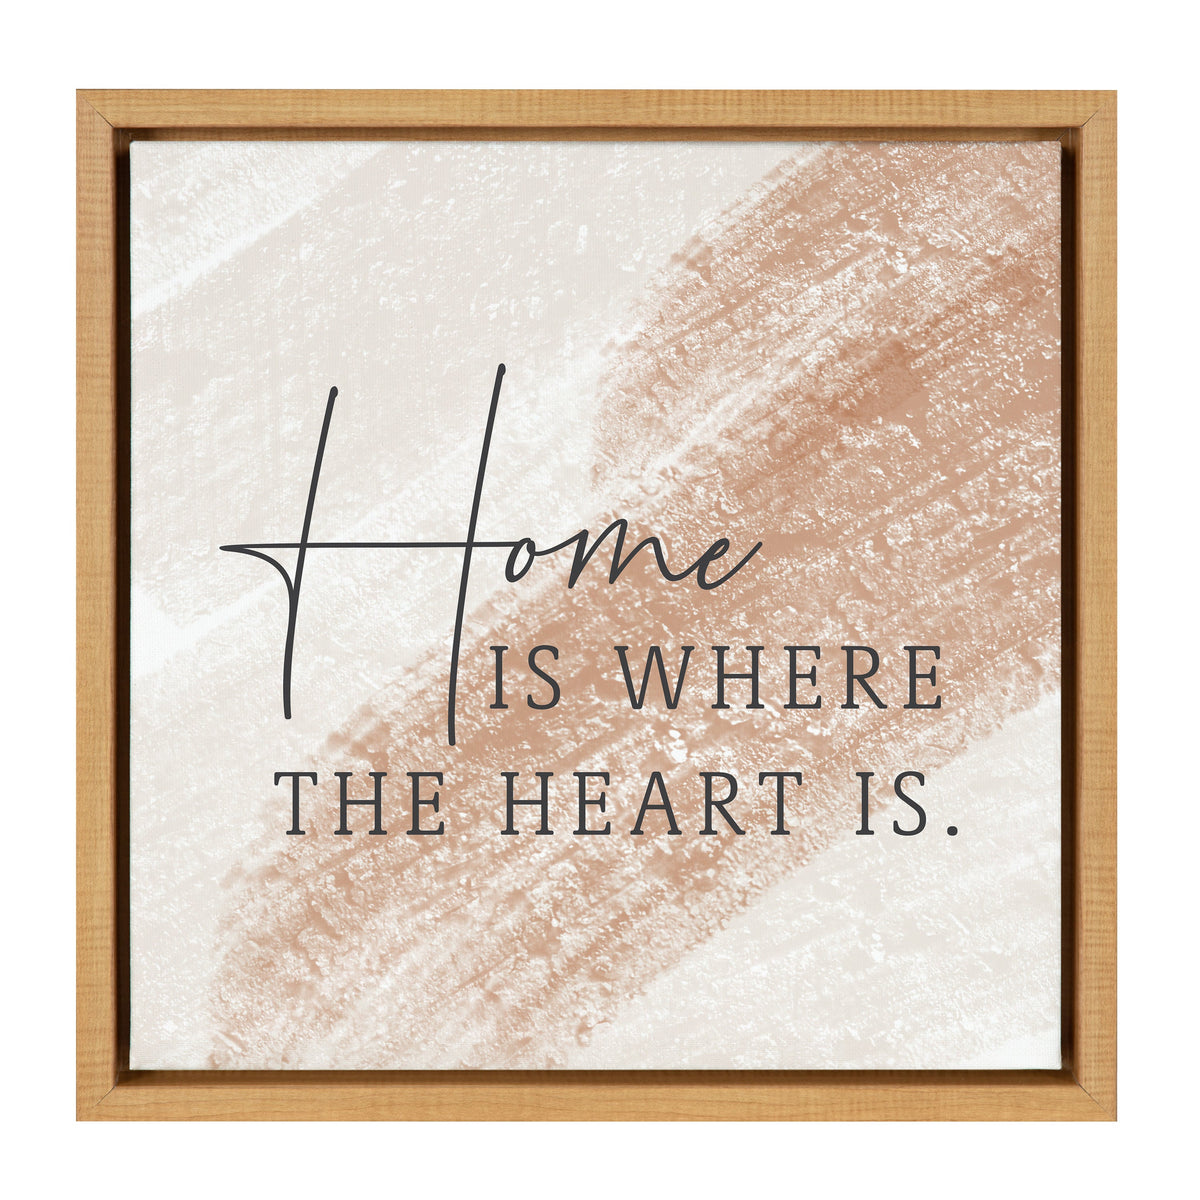 Home is where the heart is / 14x14 Framed Canvas